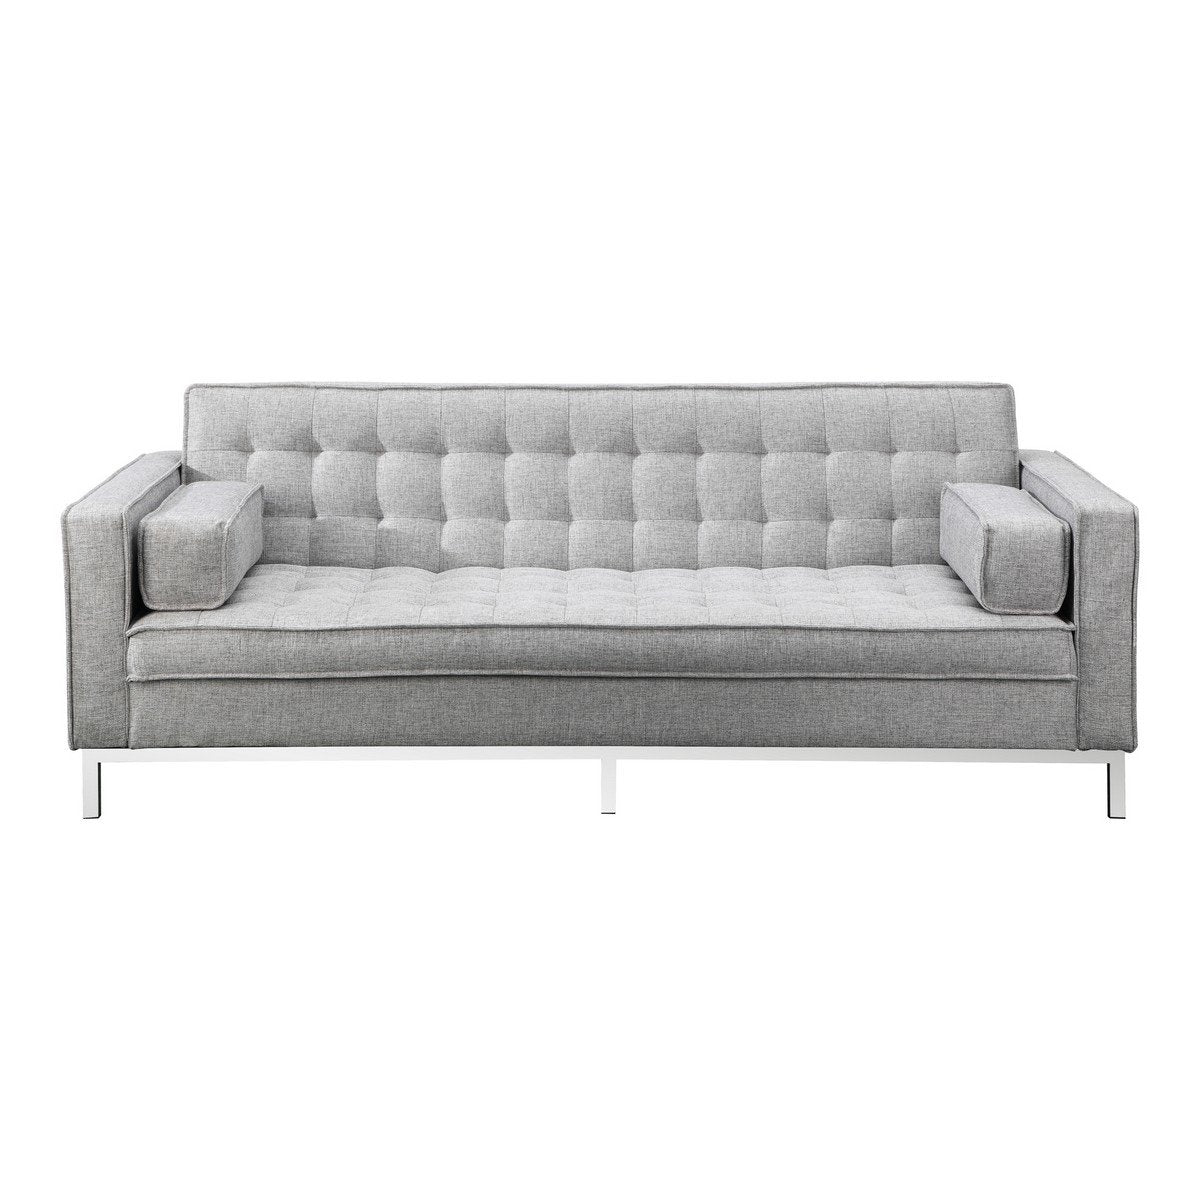 Moe's Home Collection Covella Sofa Bed - FW-1004-29 - Moe's Home Collection - Sofa Beds - Minimal And Modern - 1